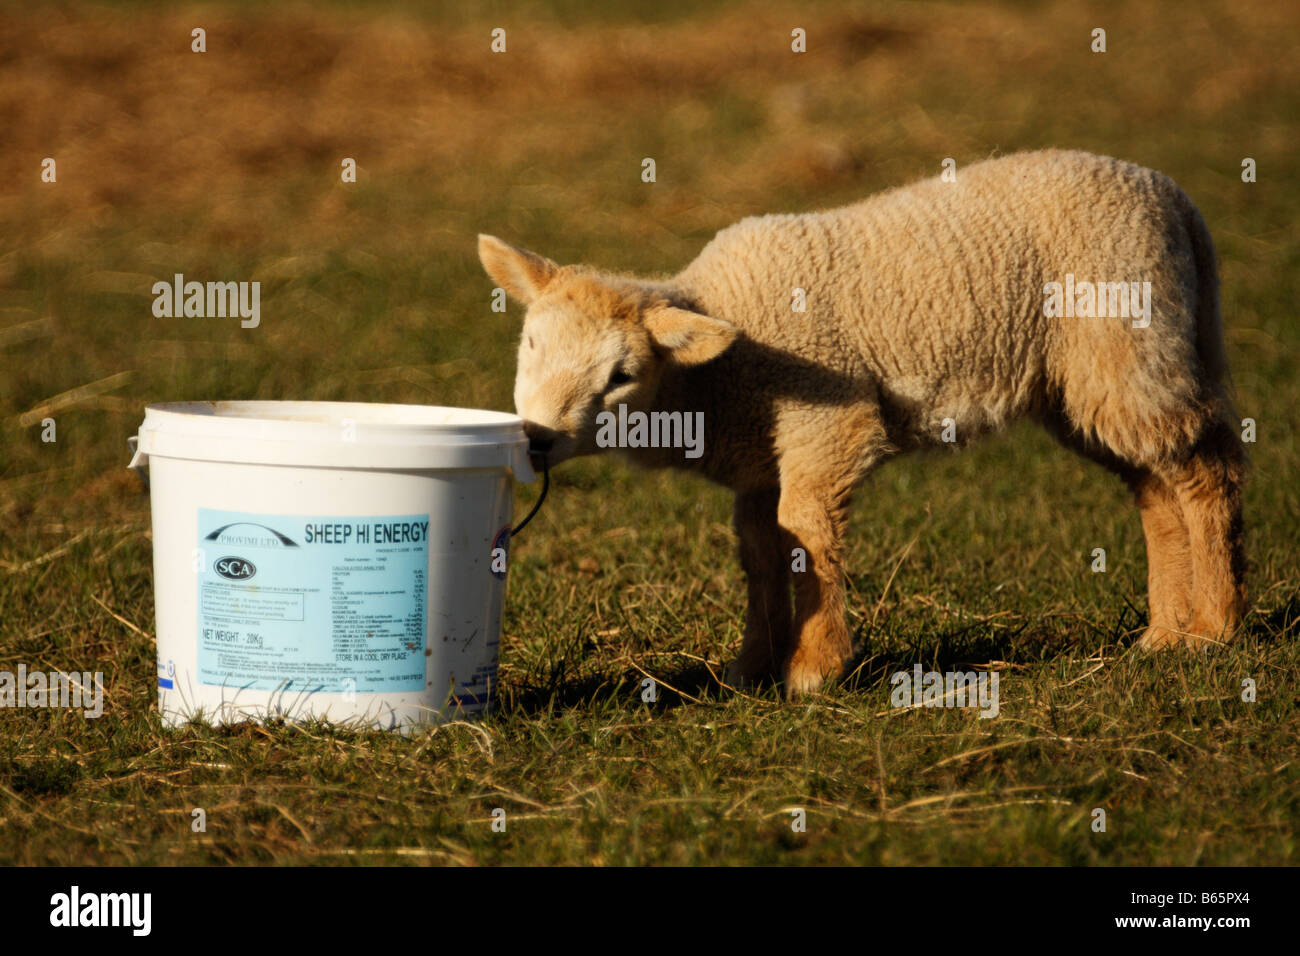 Young Lamb eating Sheep Food from a plastic bucket Stock Photo